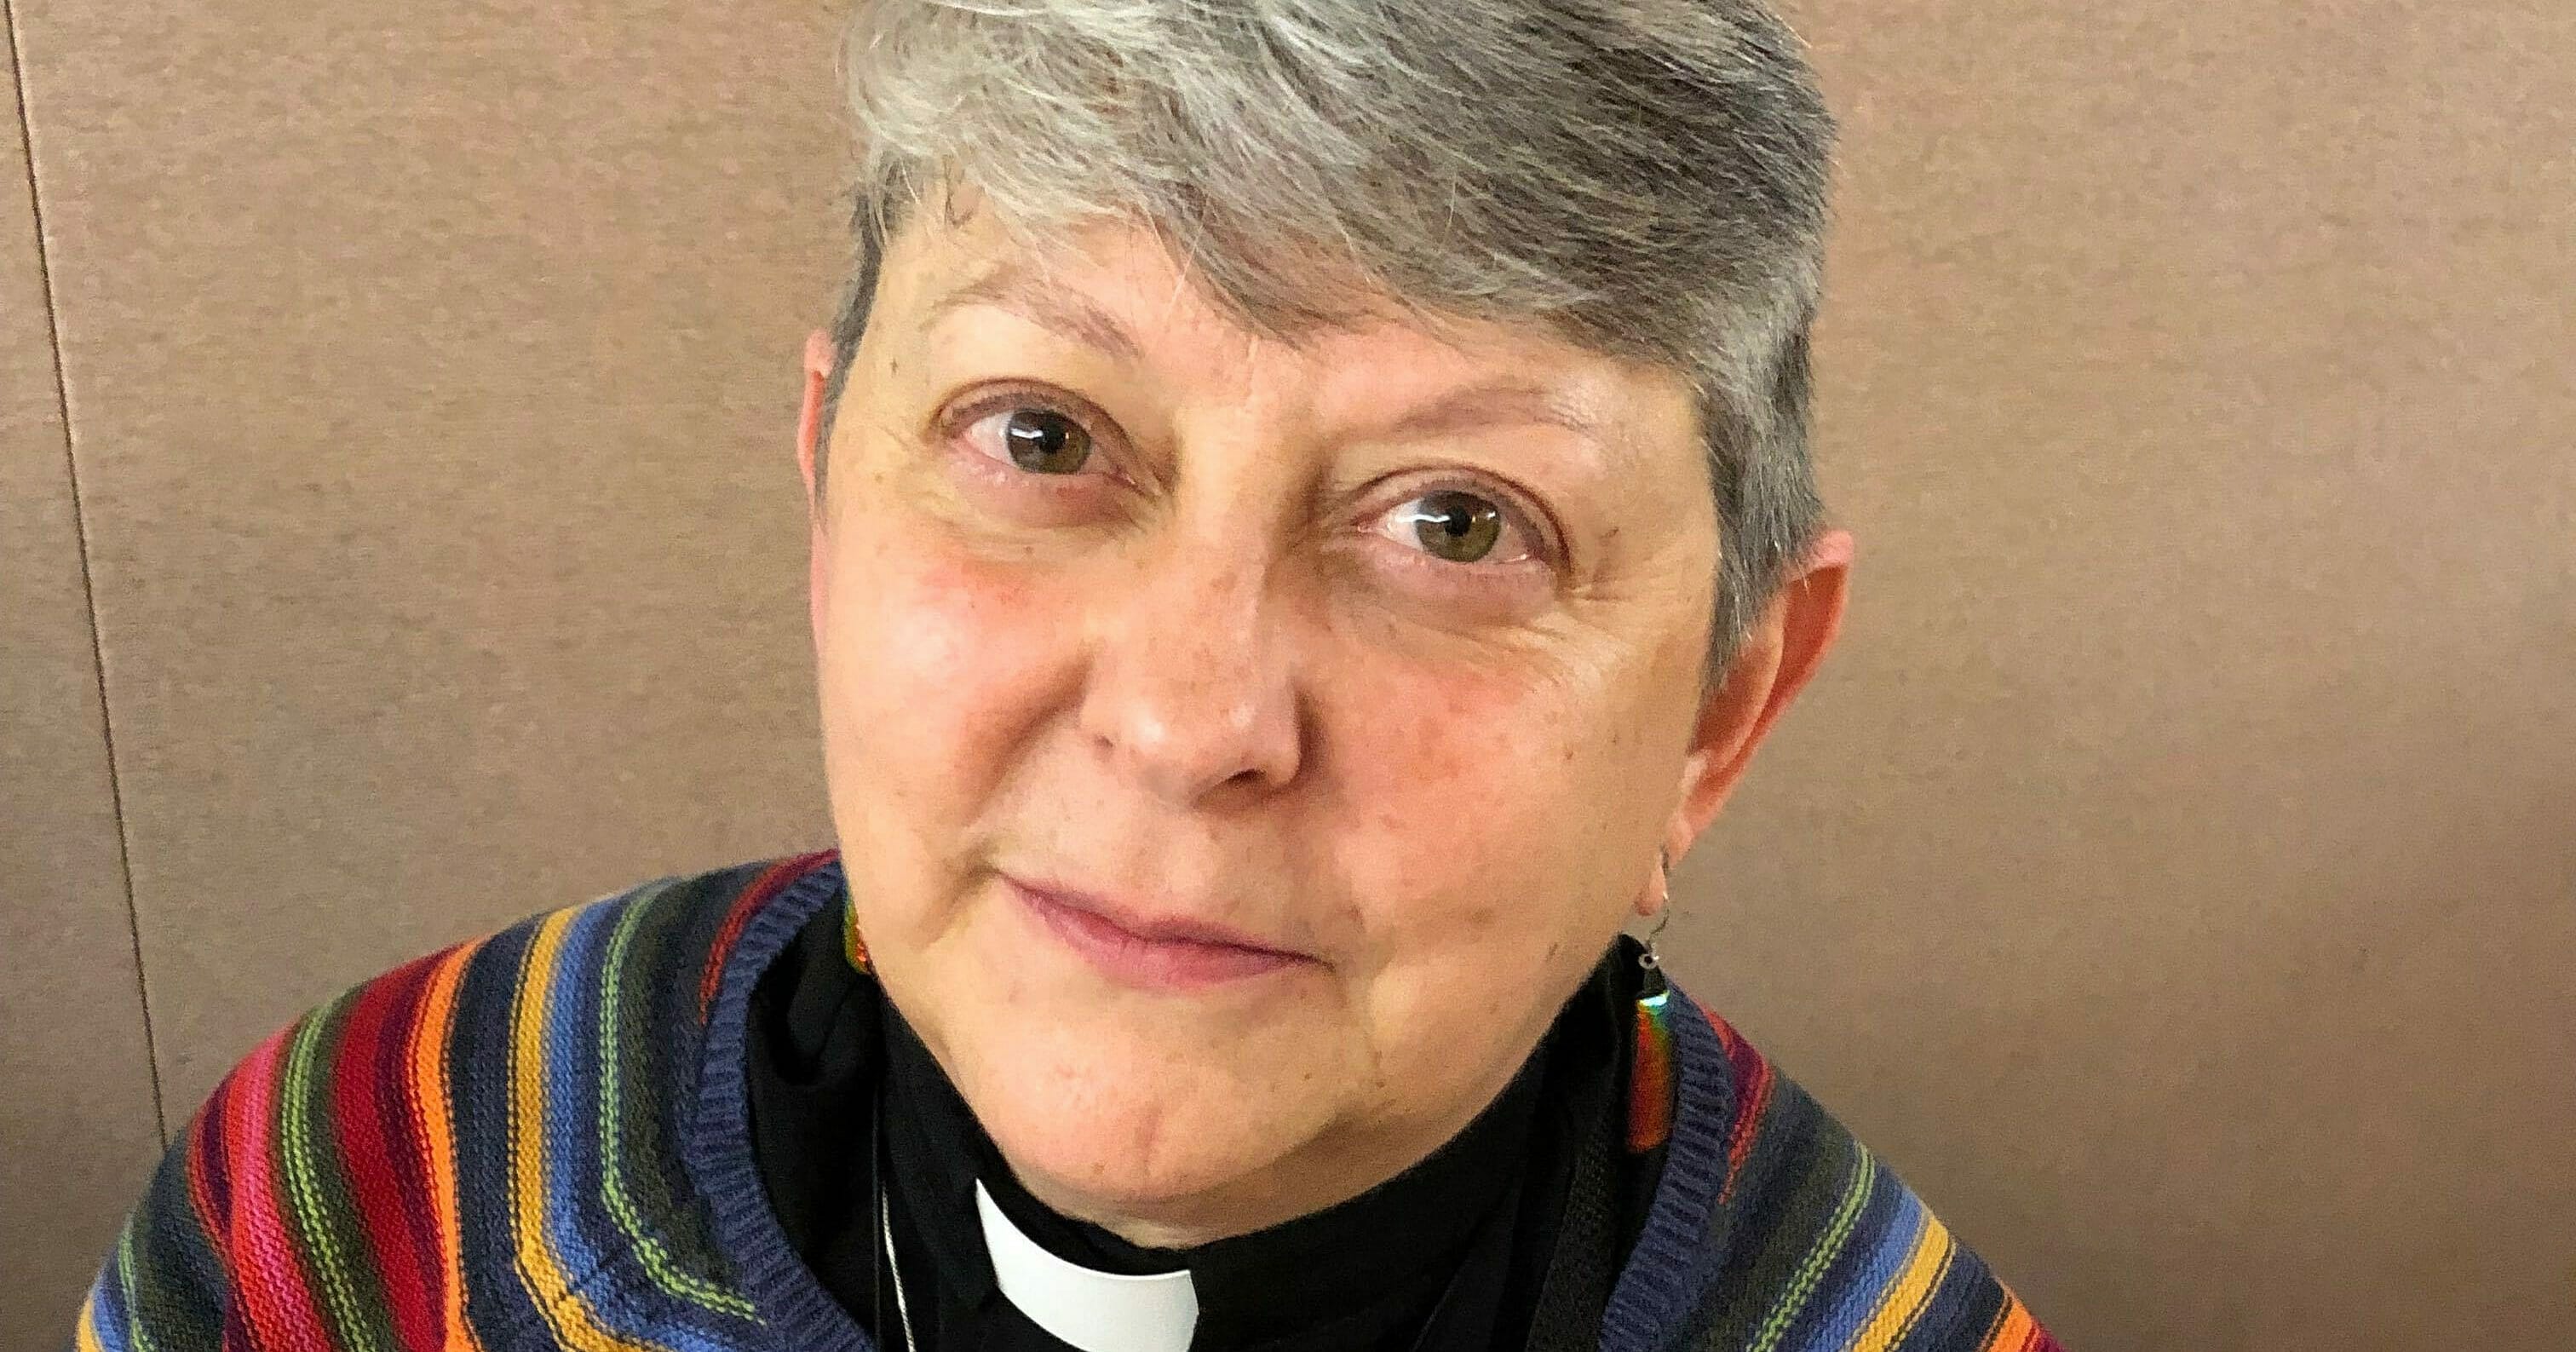 Lois McCullen Parr, 60, a United Methodist elder in Albion, Michigan, who identifies as bisexual and queer, is seen Monday at the UMC's national conference in St. Louis.